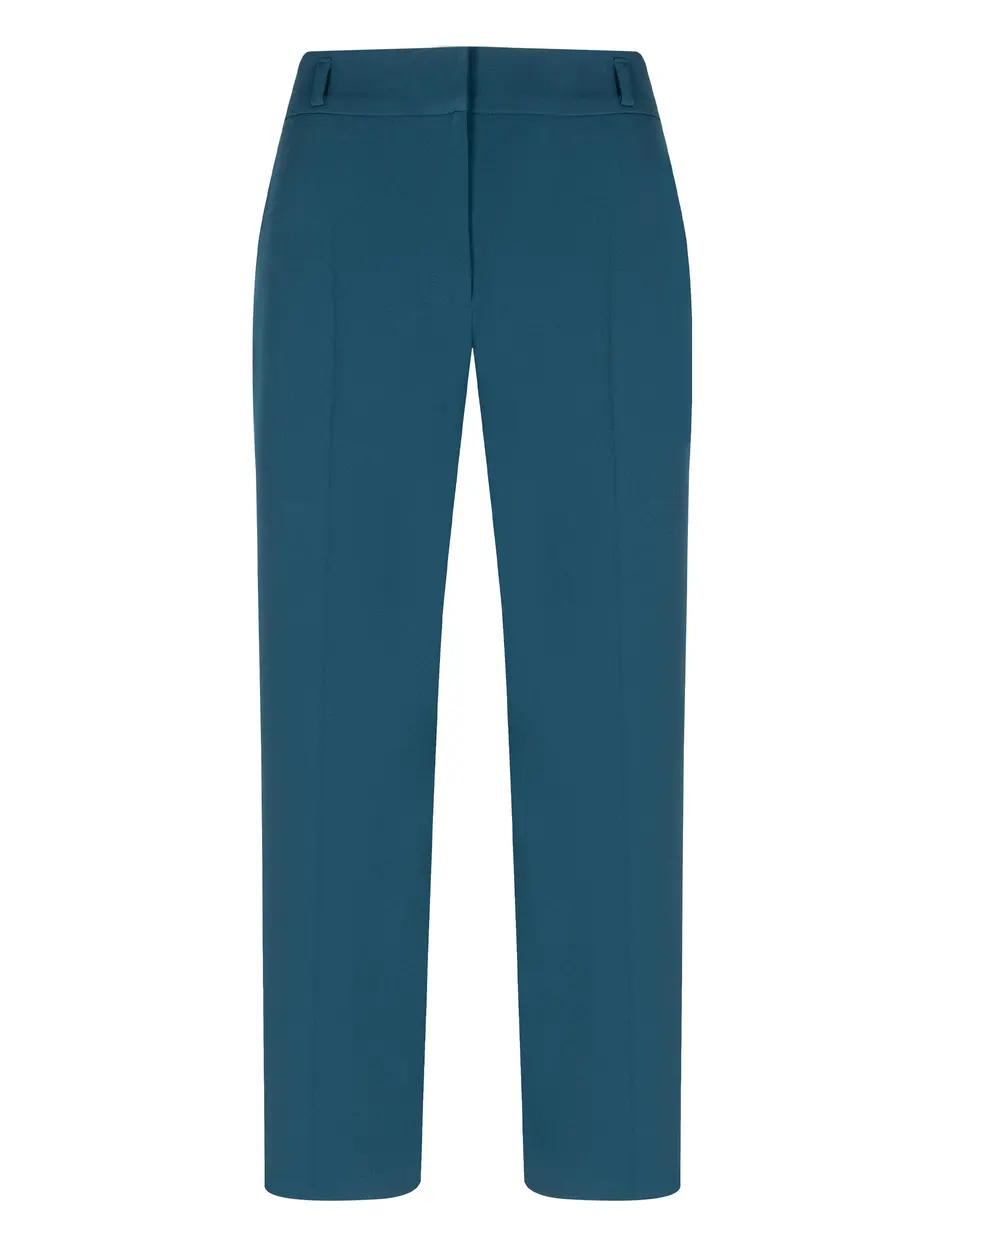 Relax Fit Ankle Length Trousers